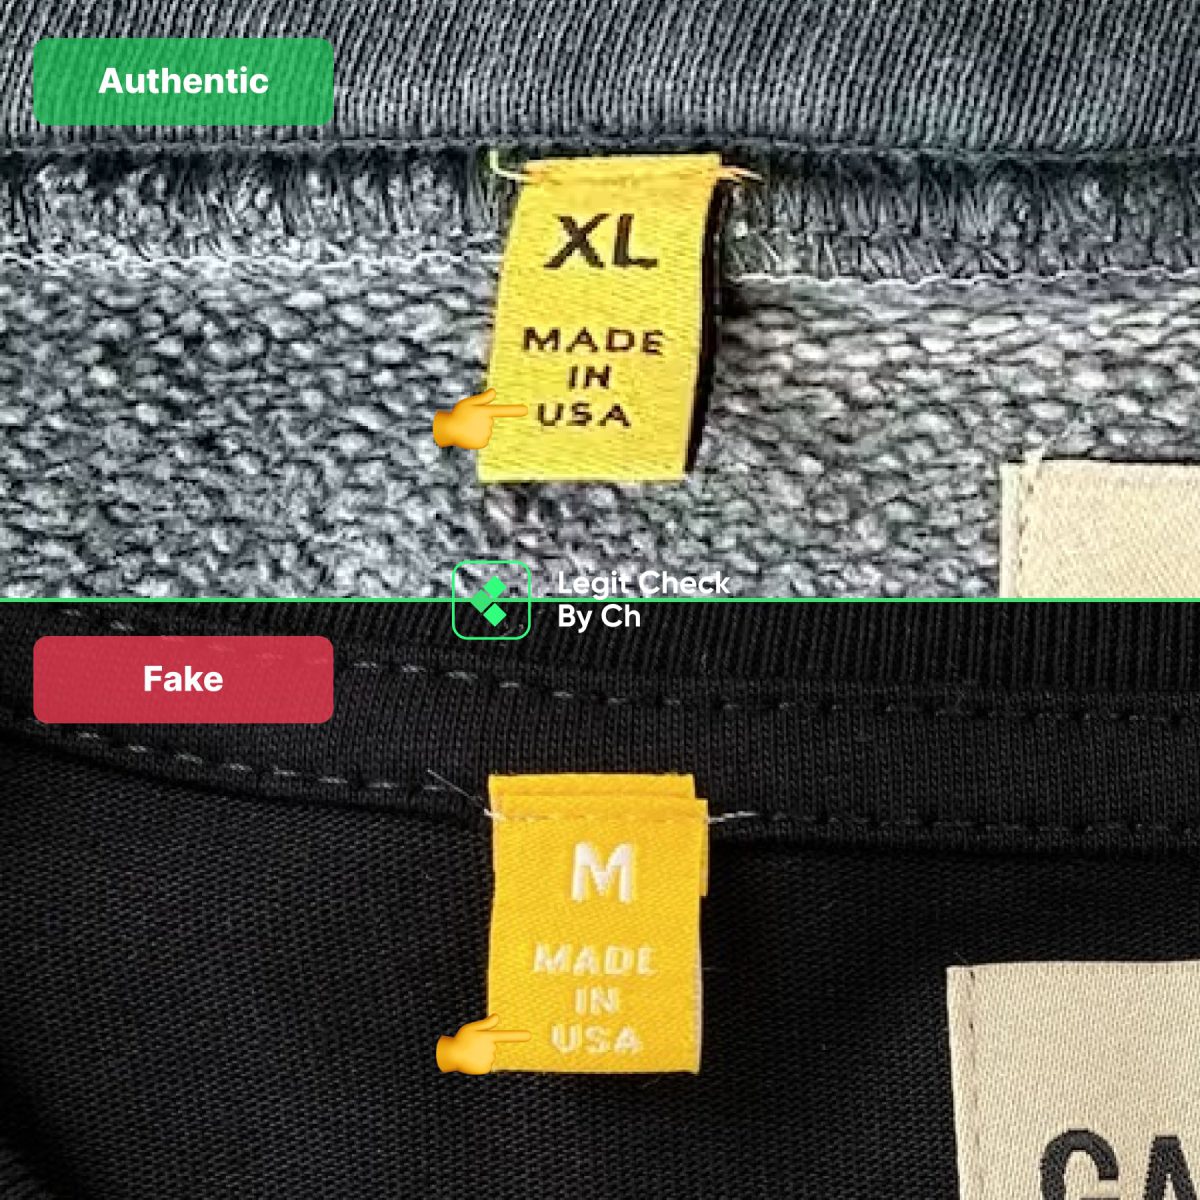 Gallery Dept Fake Vs Real Size Tag